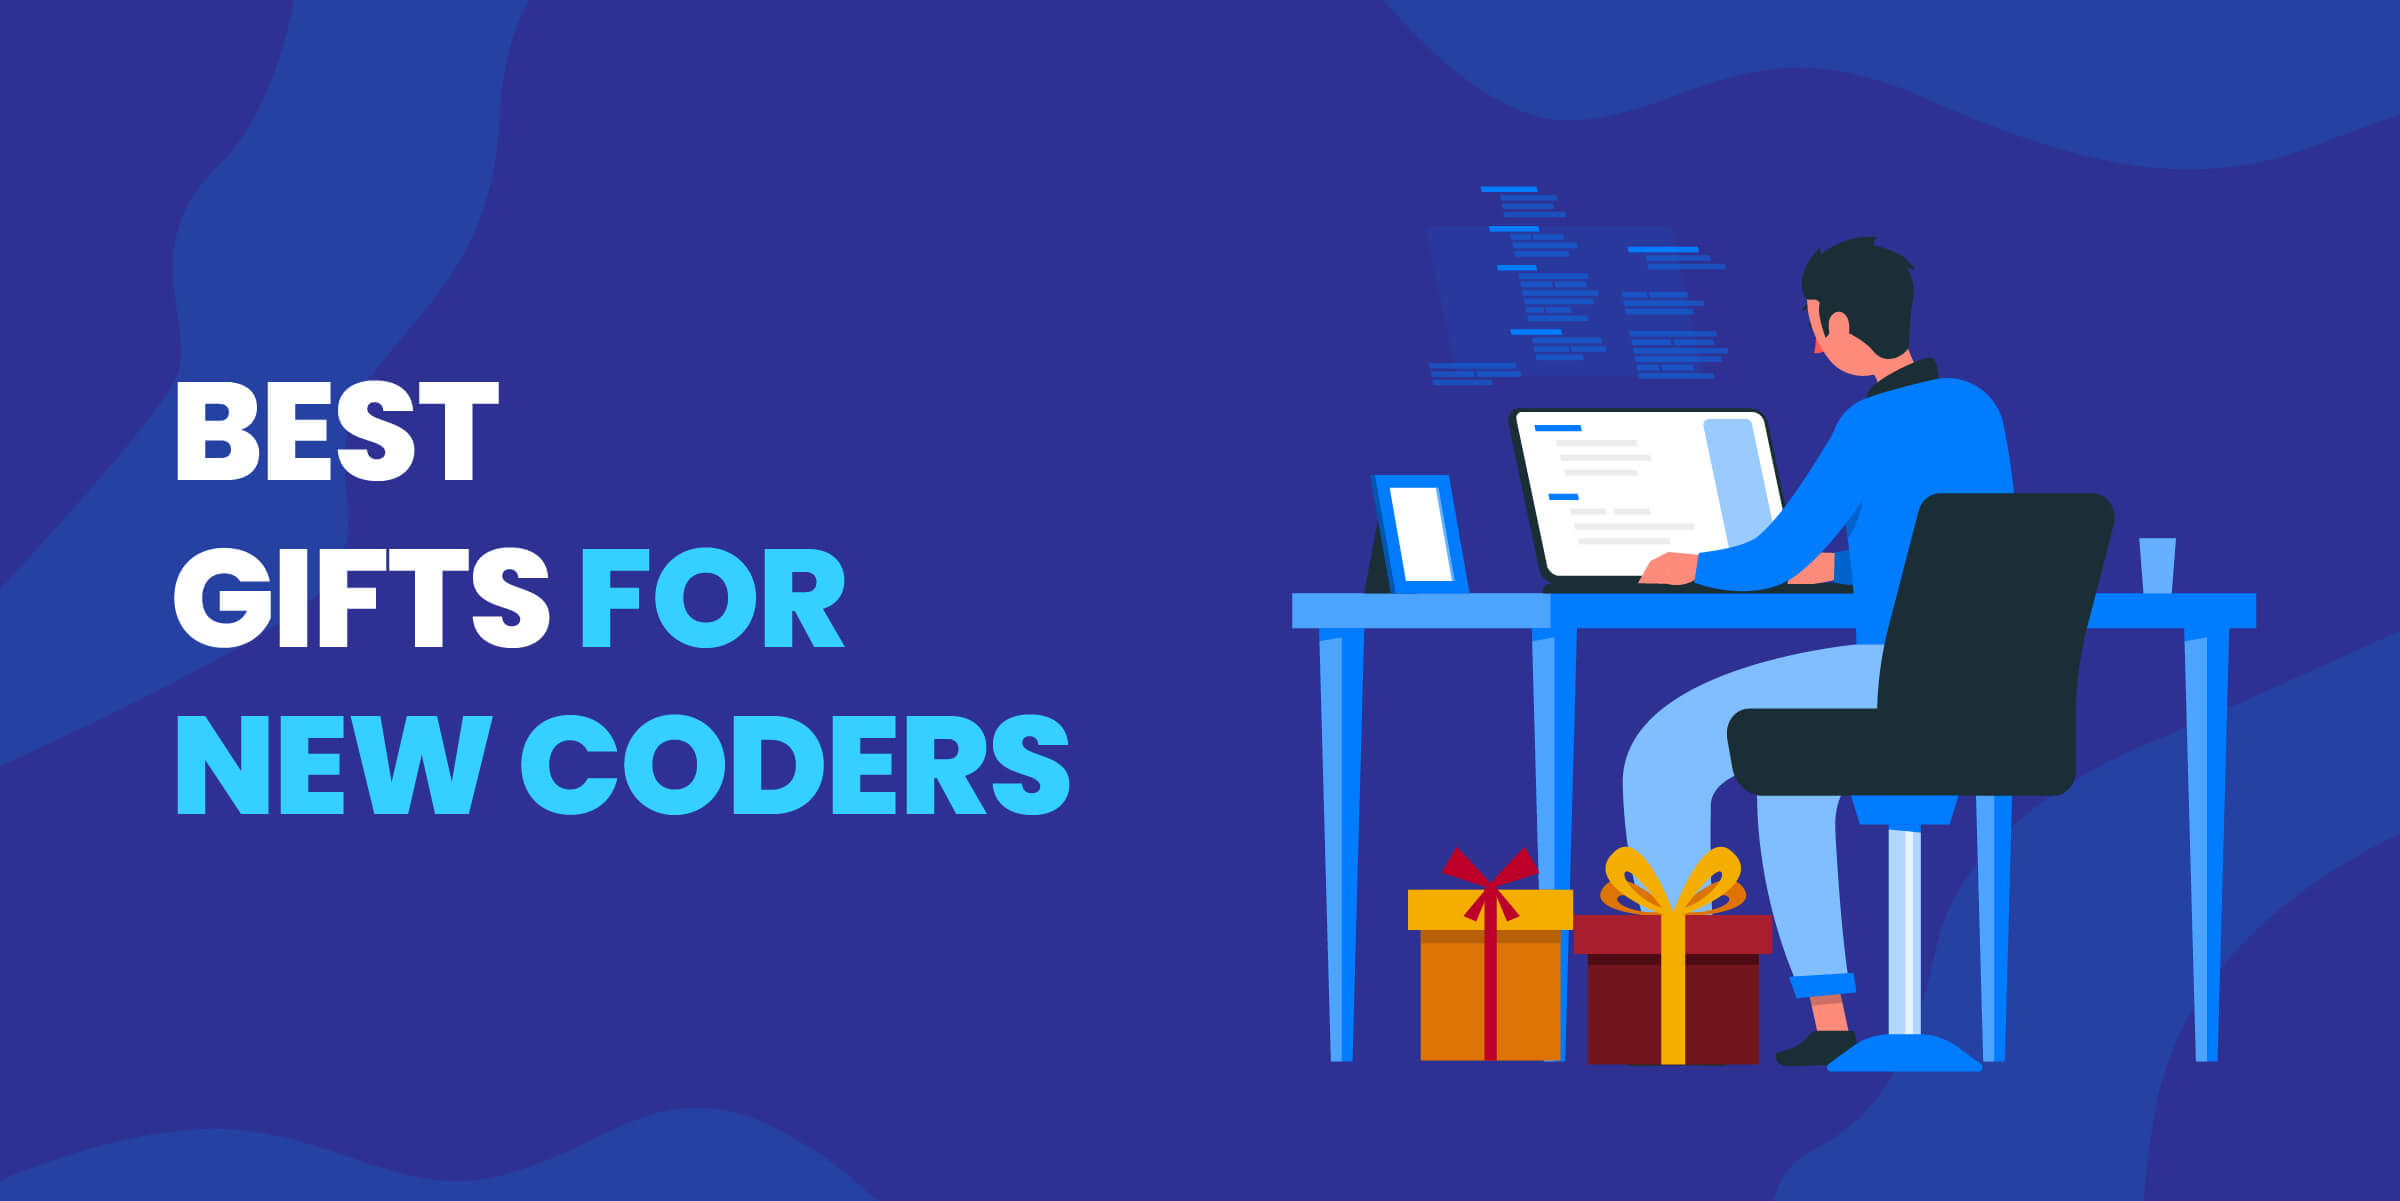 Best Gifts for New Coders